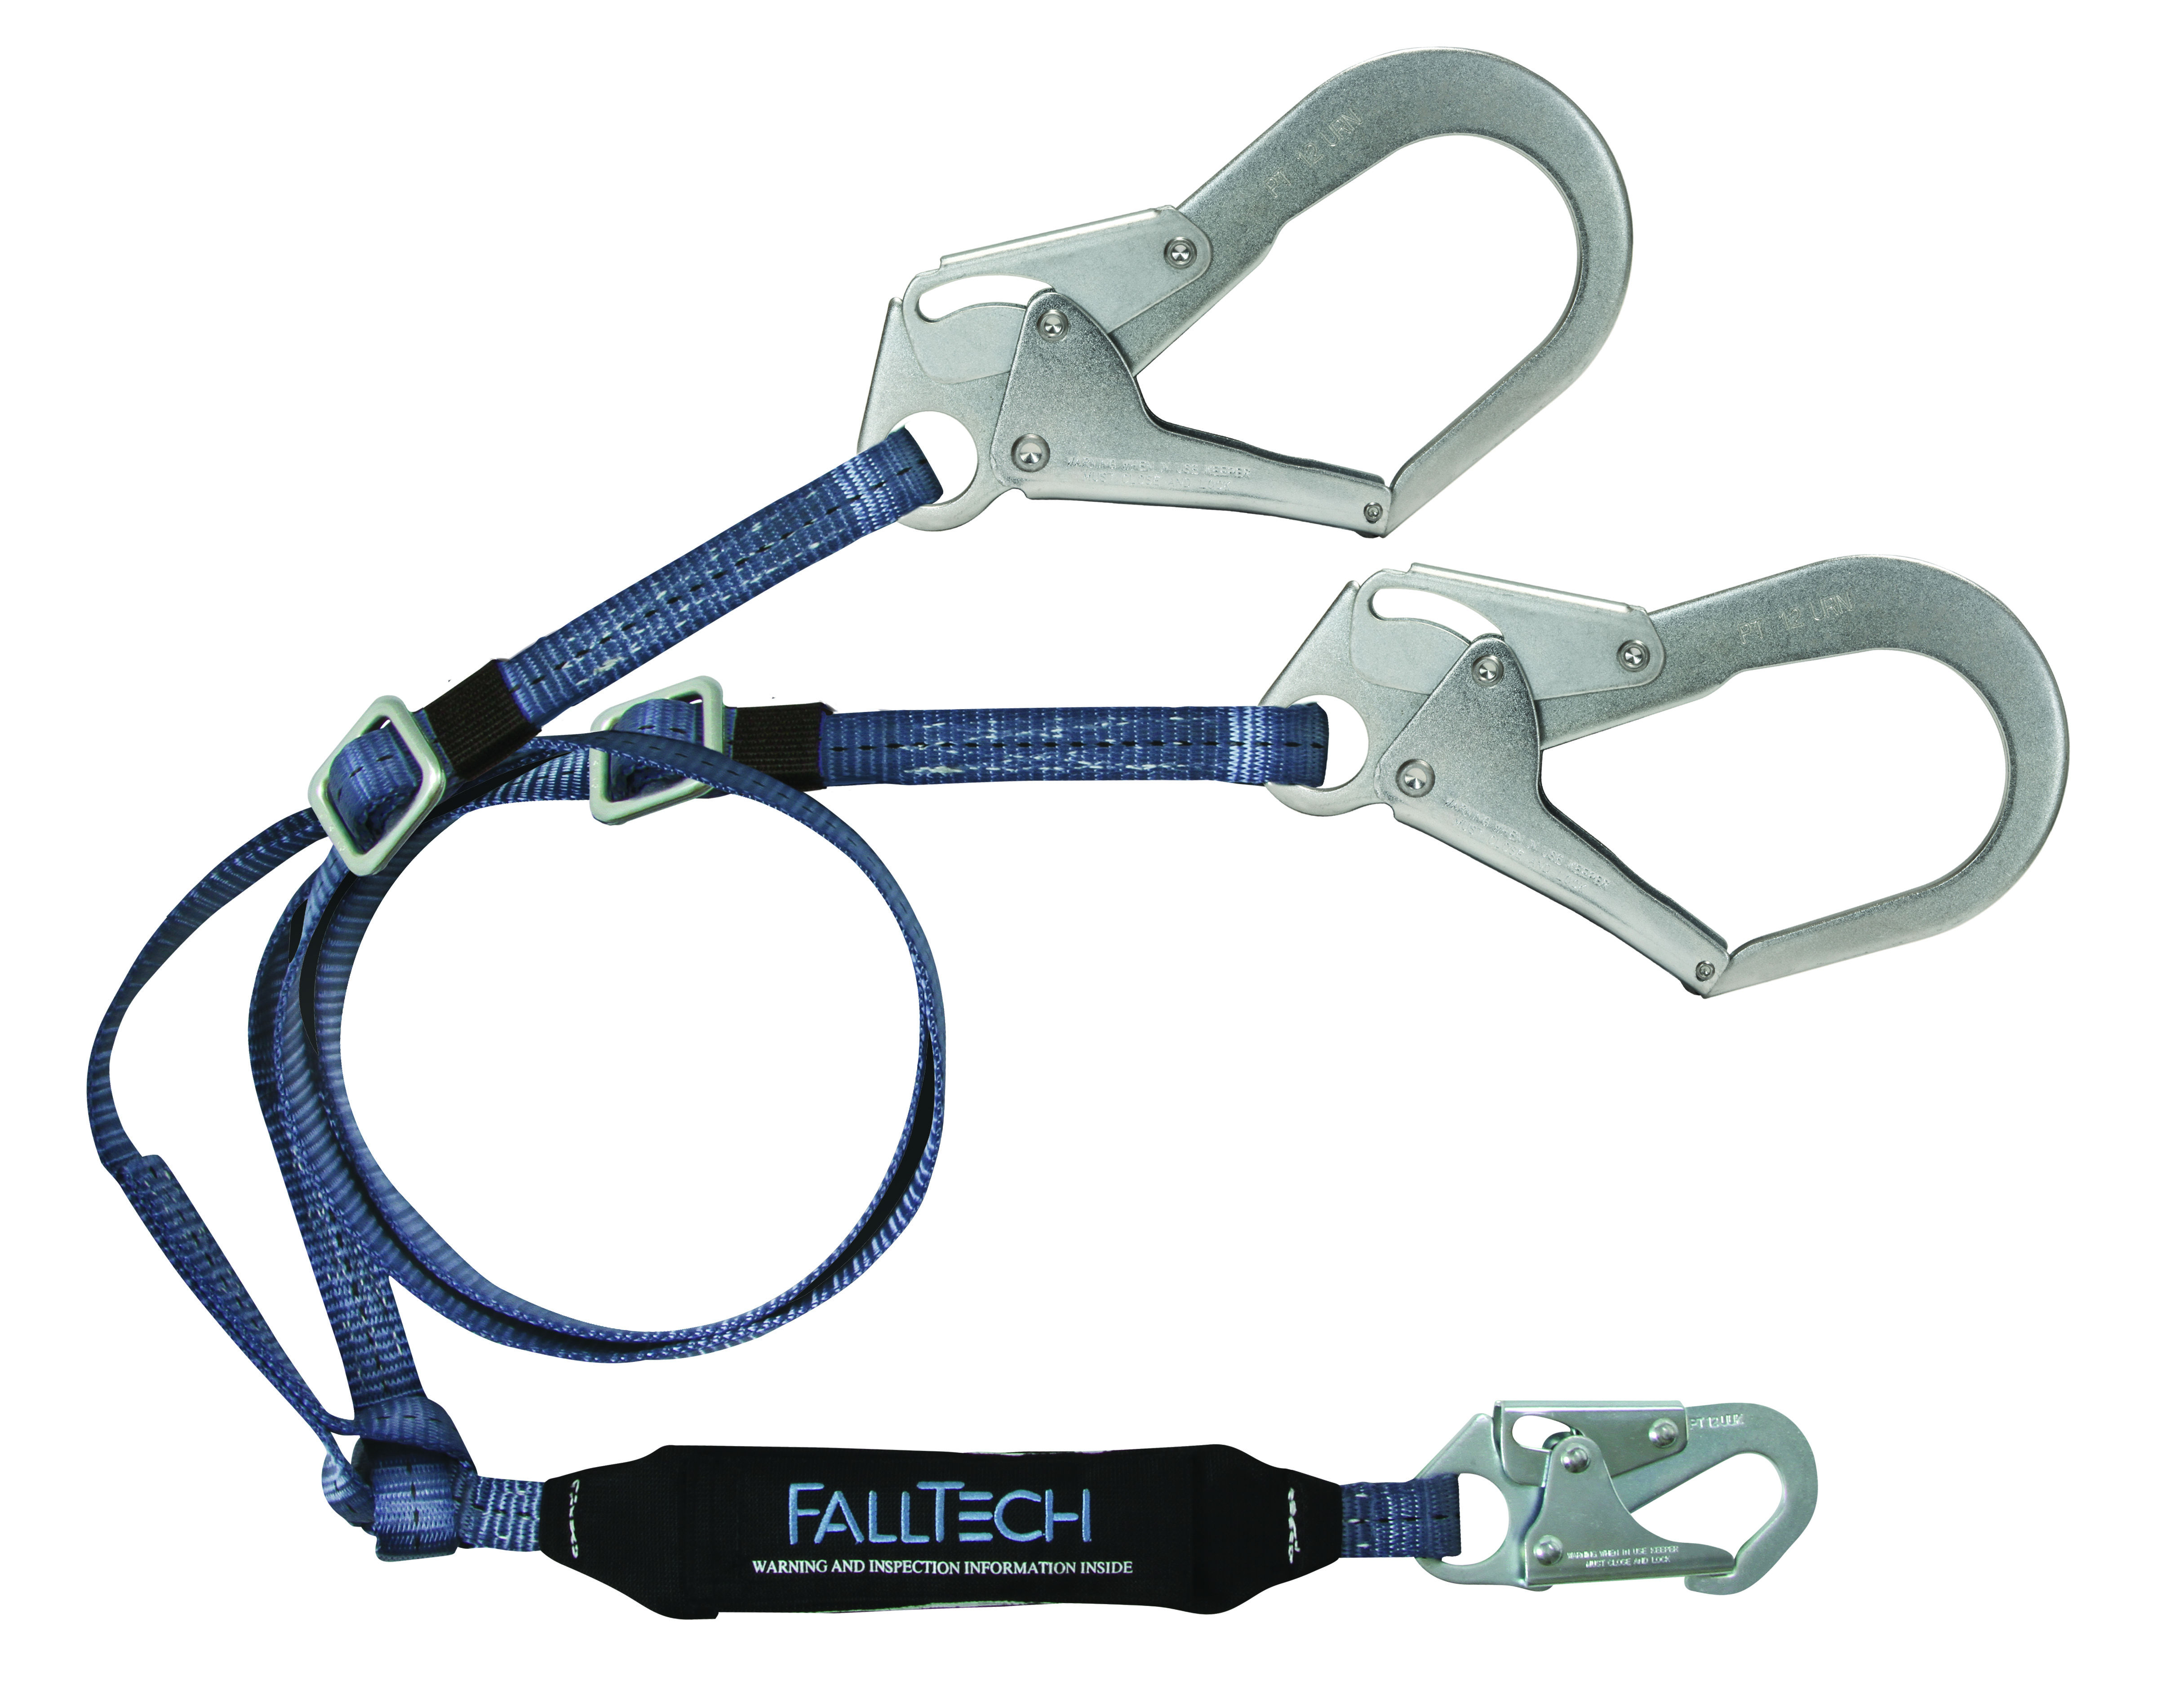 FallTech ViewPack Lanyard from GME Supply